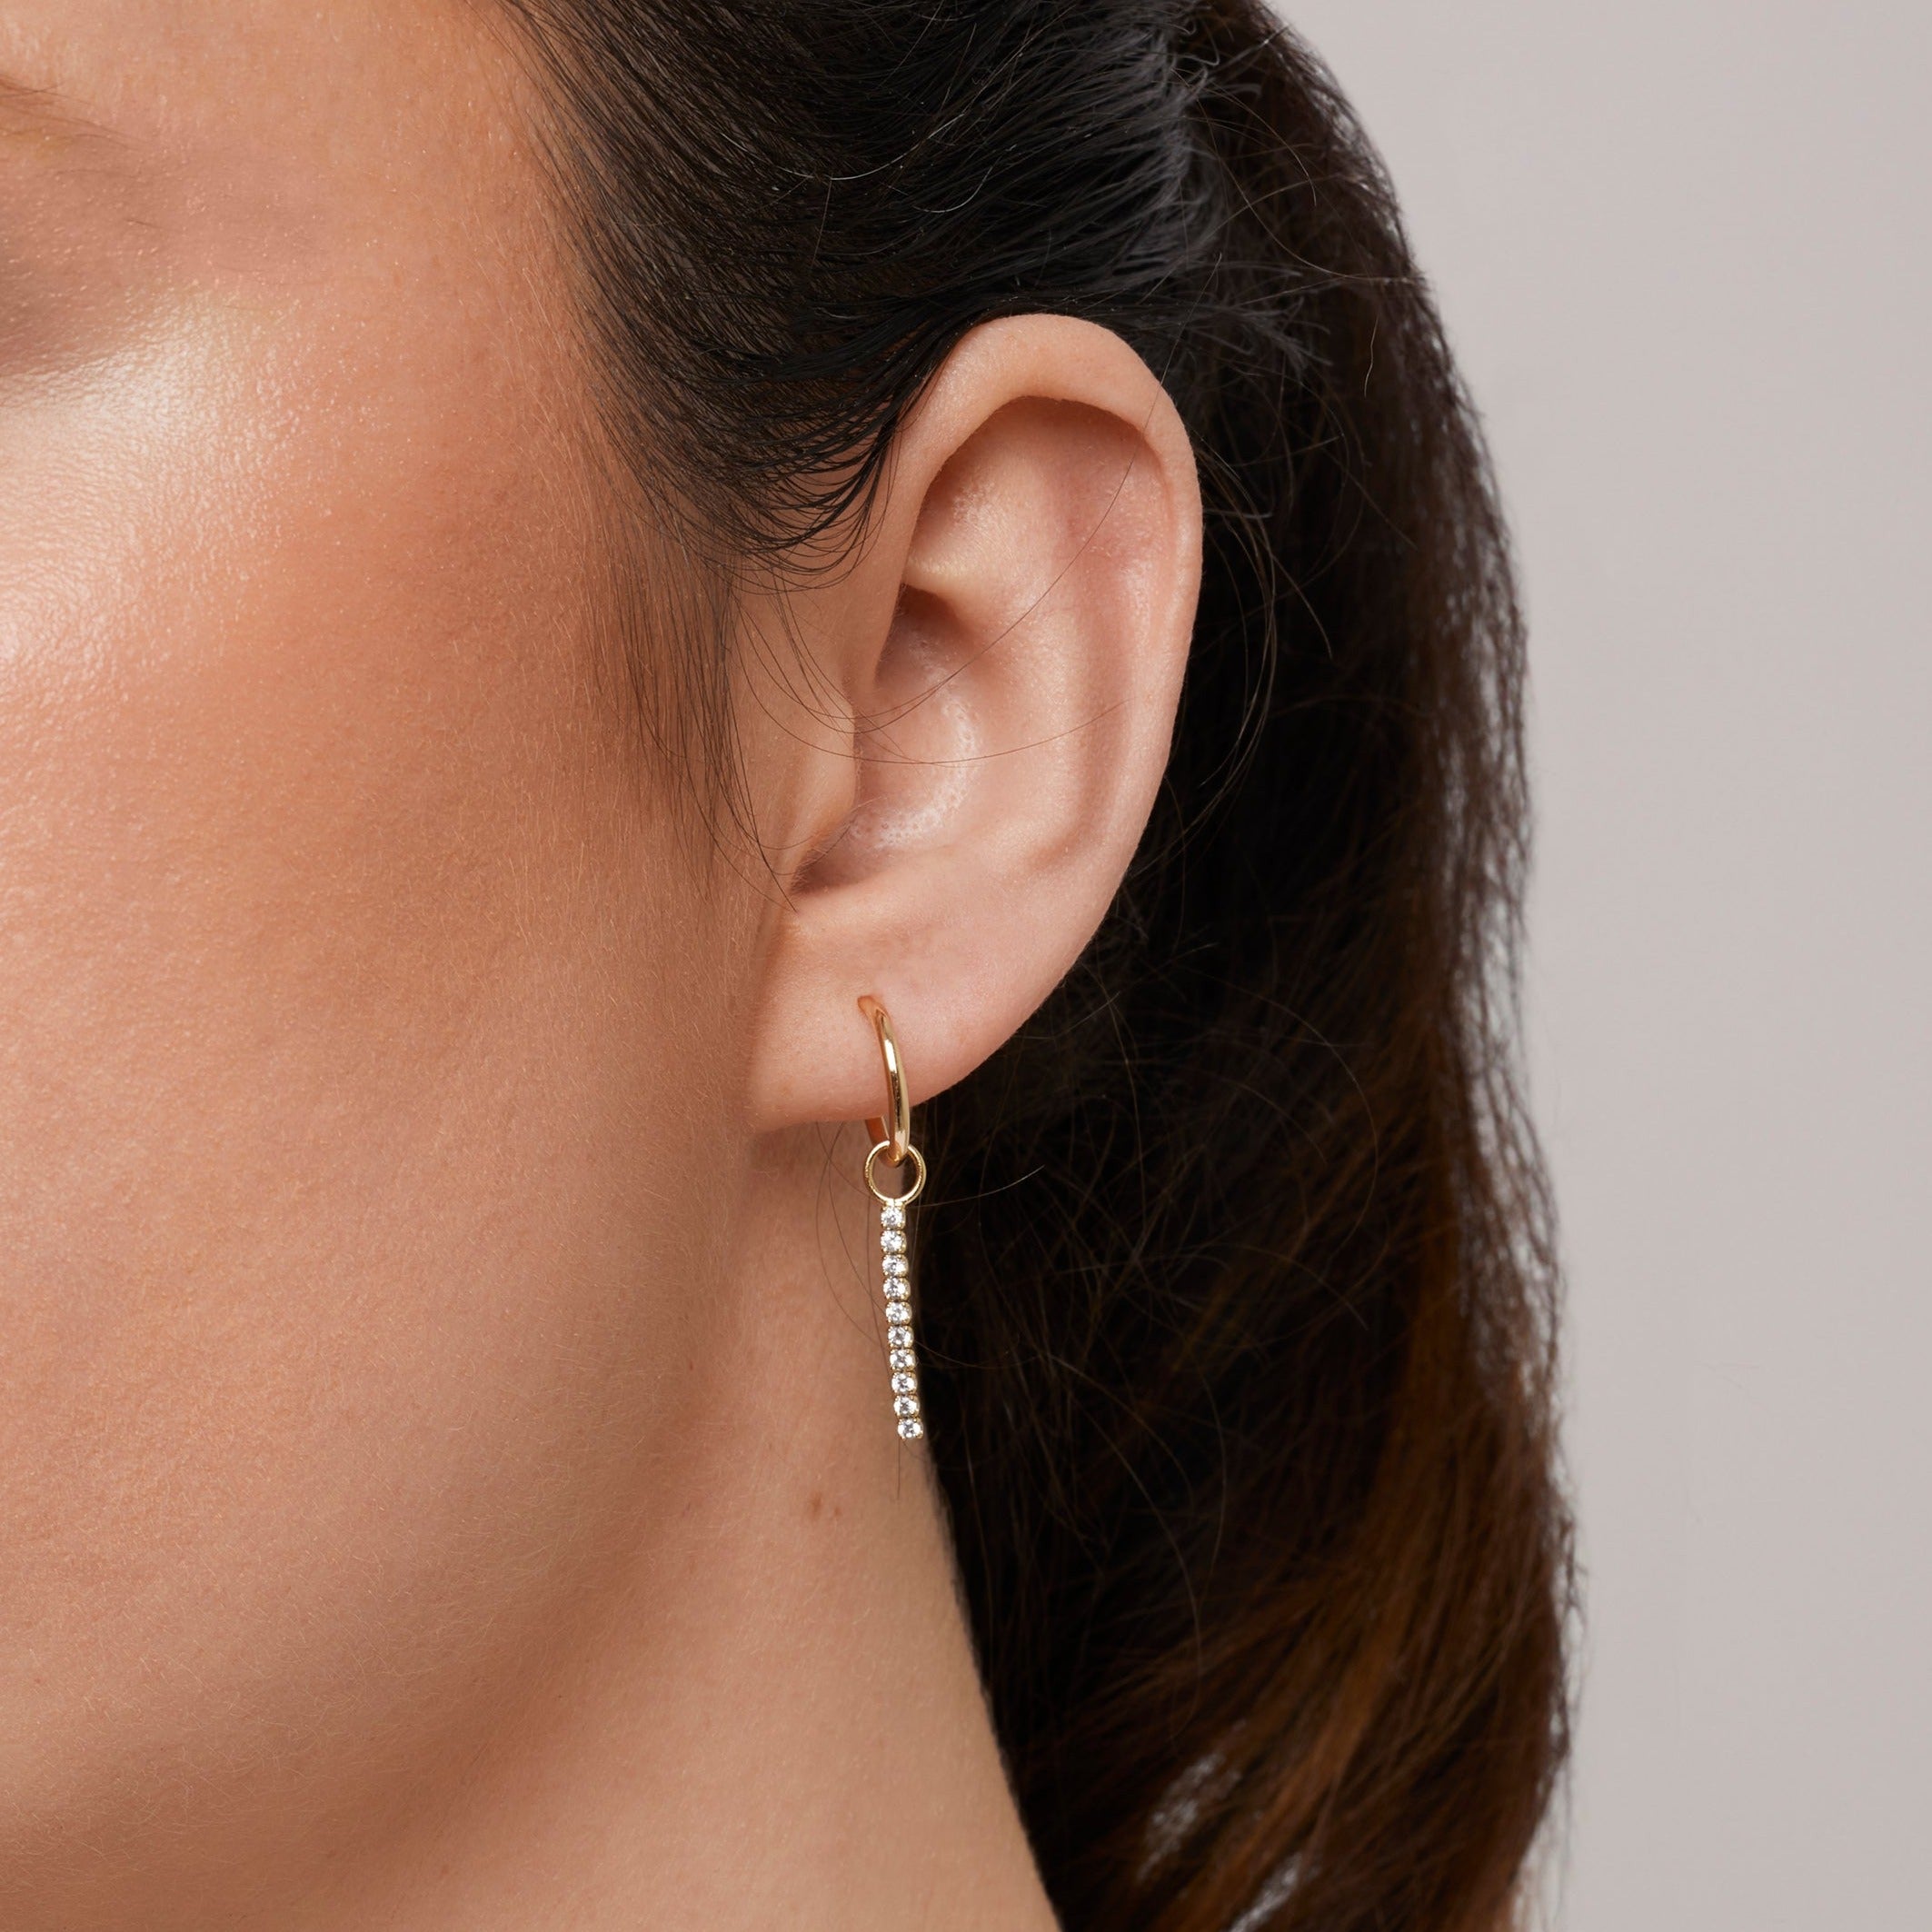 A model wearing the Pavé Bar Hoop Charms are made with high-quality materials, including 18K gold plating over 925 Sterling Silver. These charms are both non-tarnish and water resistant. The perfect combination of style and durability.